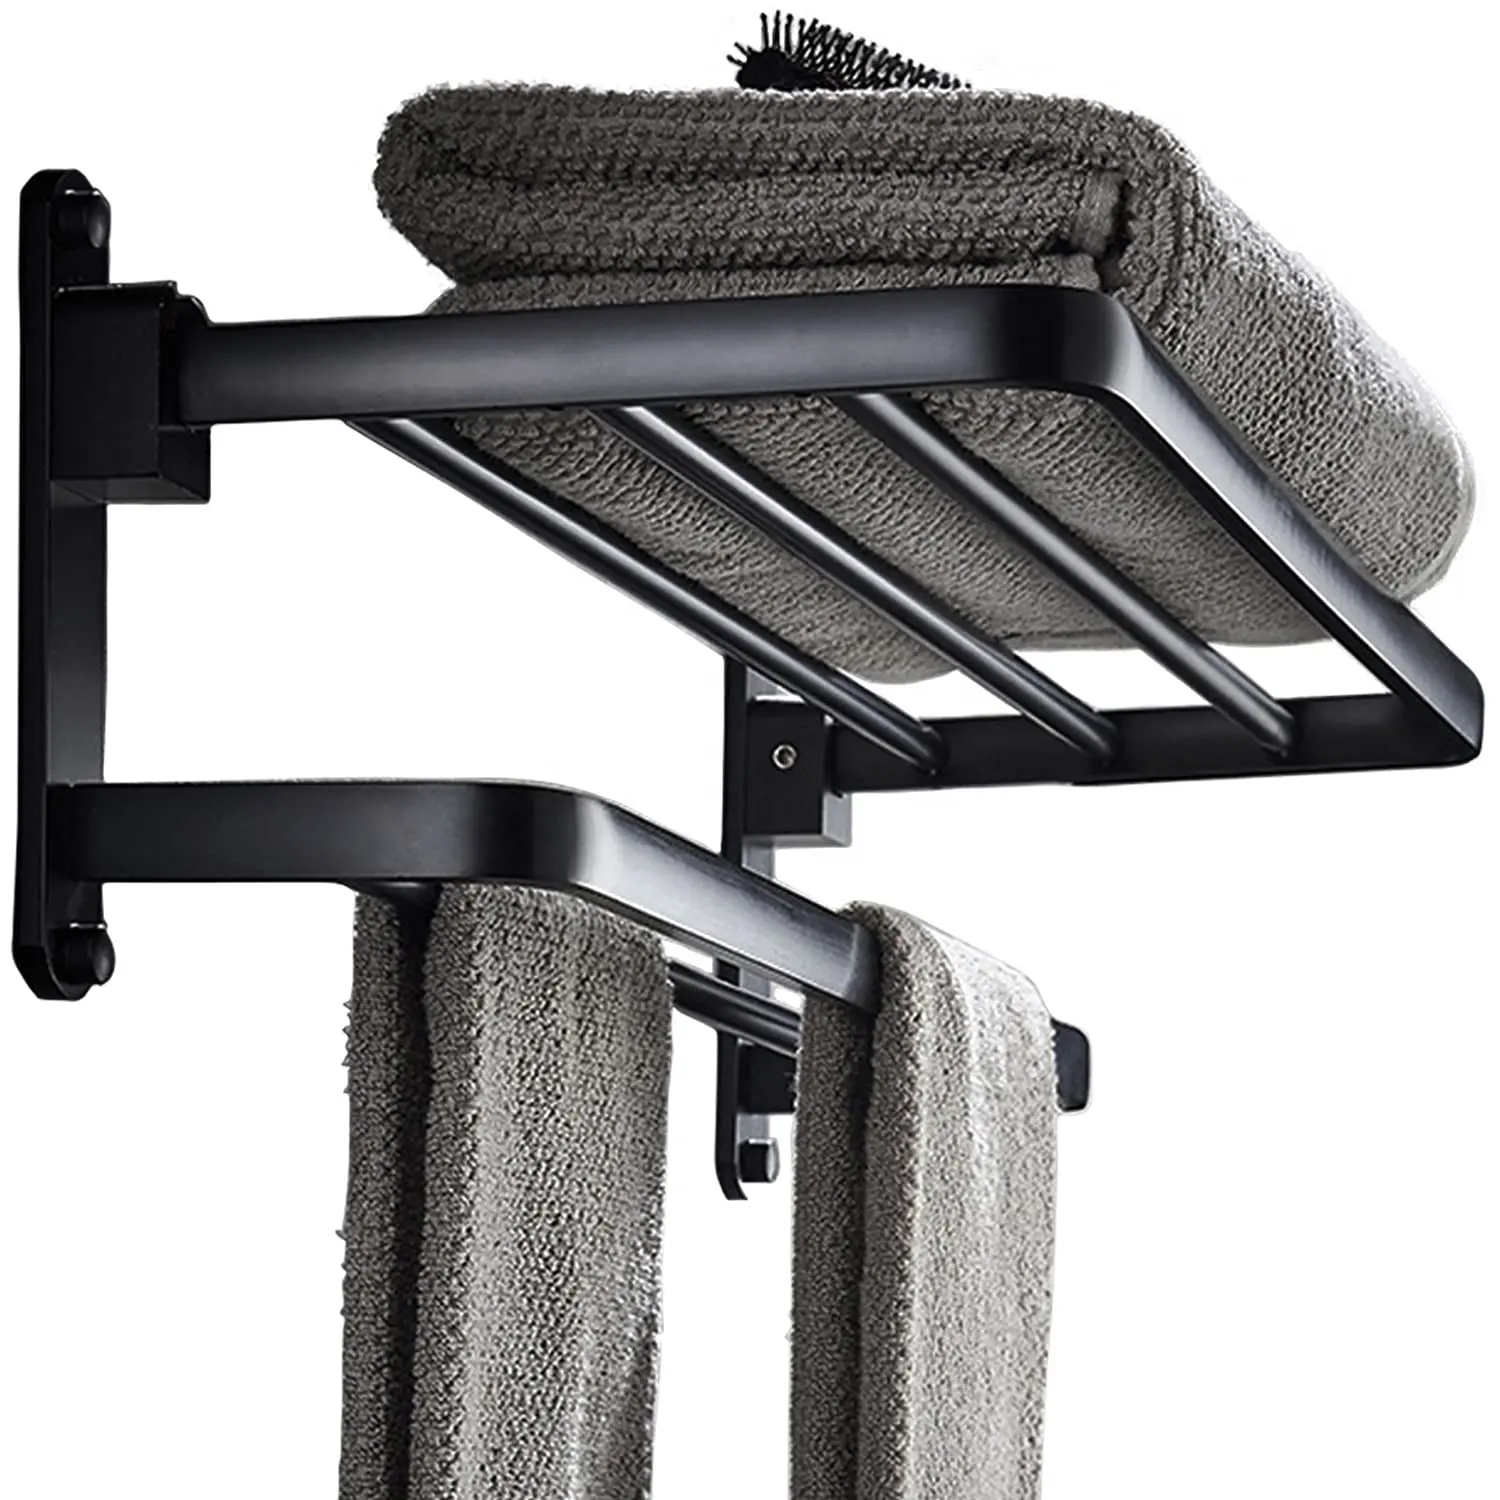 Wholesale factory price Matte black Aluminum towel rack bathroom accessory towel holder Free punching Silver Towel bar for Hotel